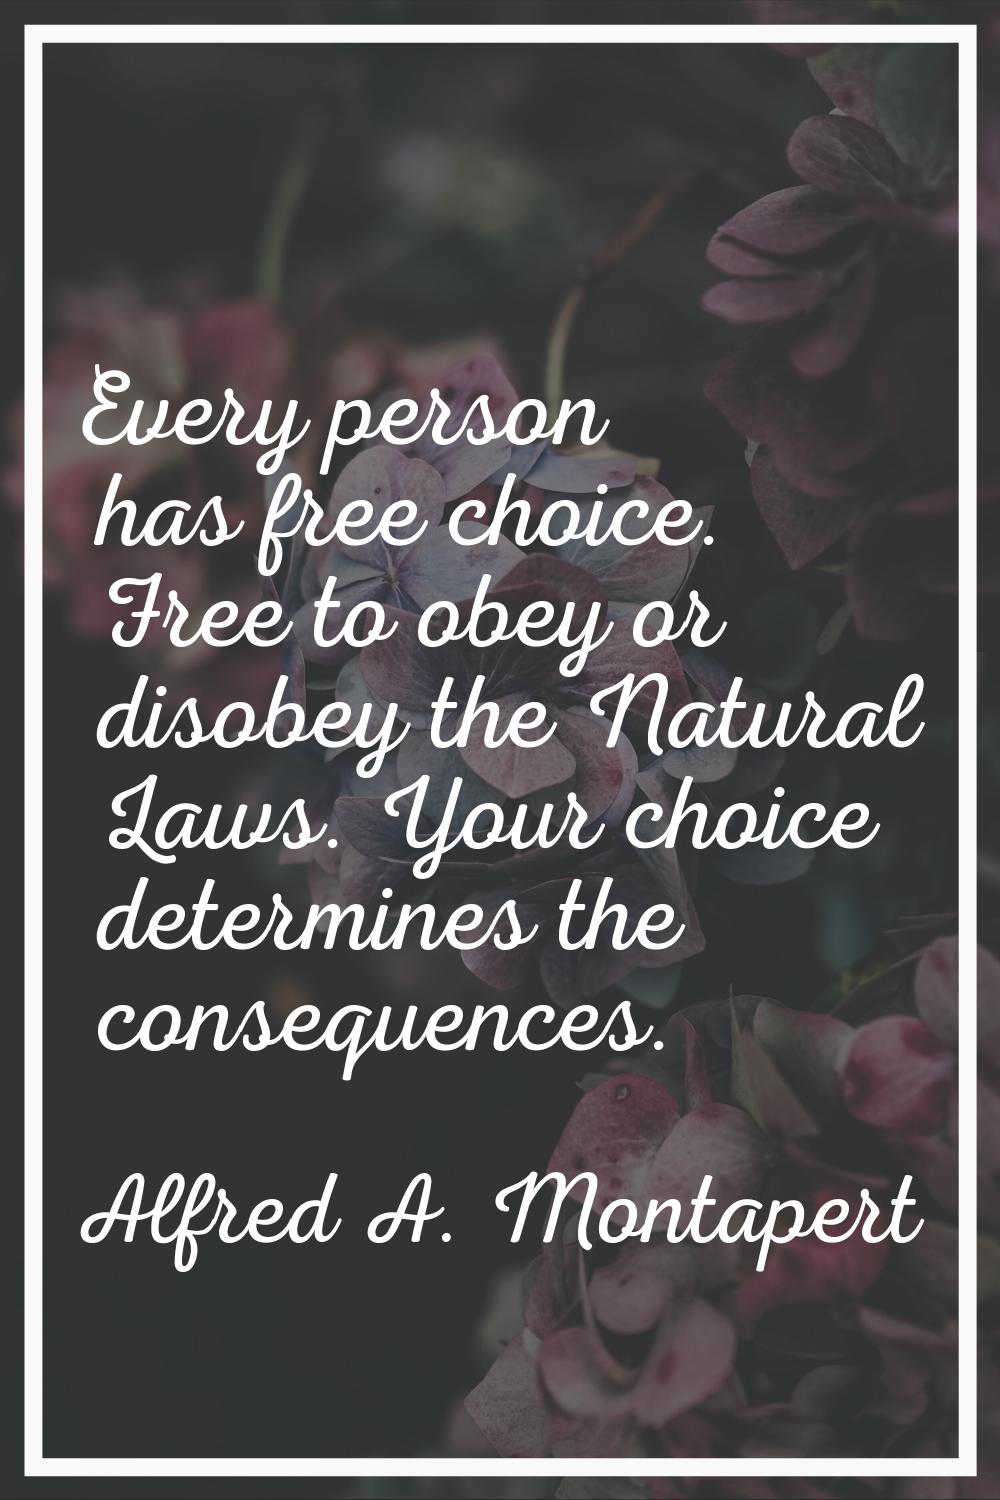 Every person has free choice. Free to obey or disobey the Natural Laws. Your choice determines the 